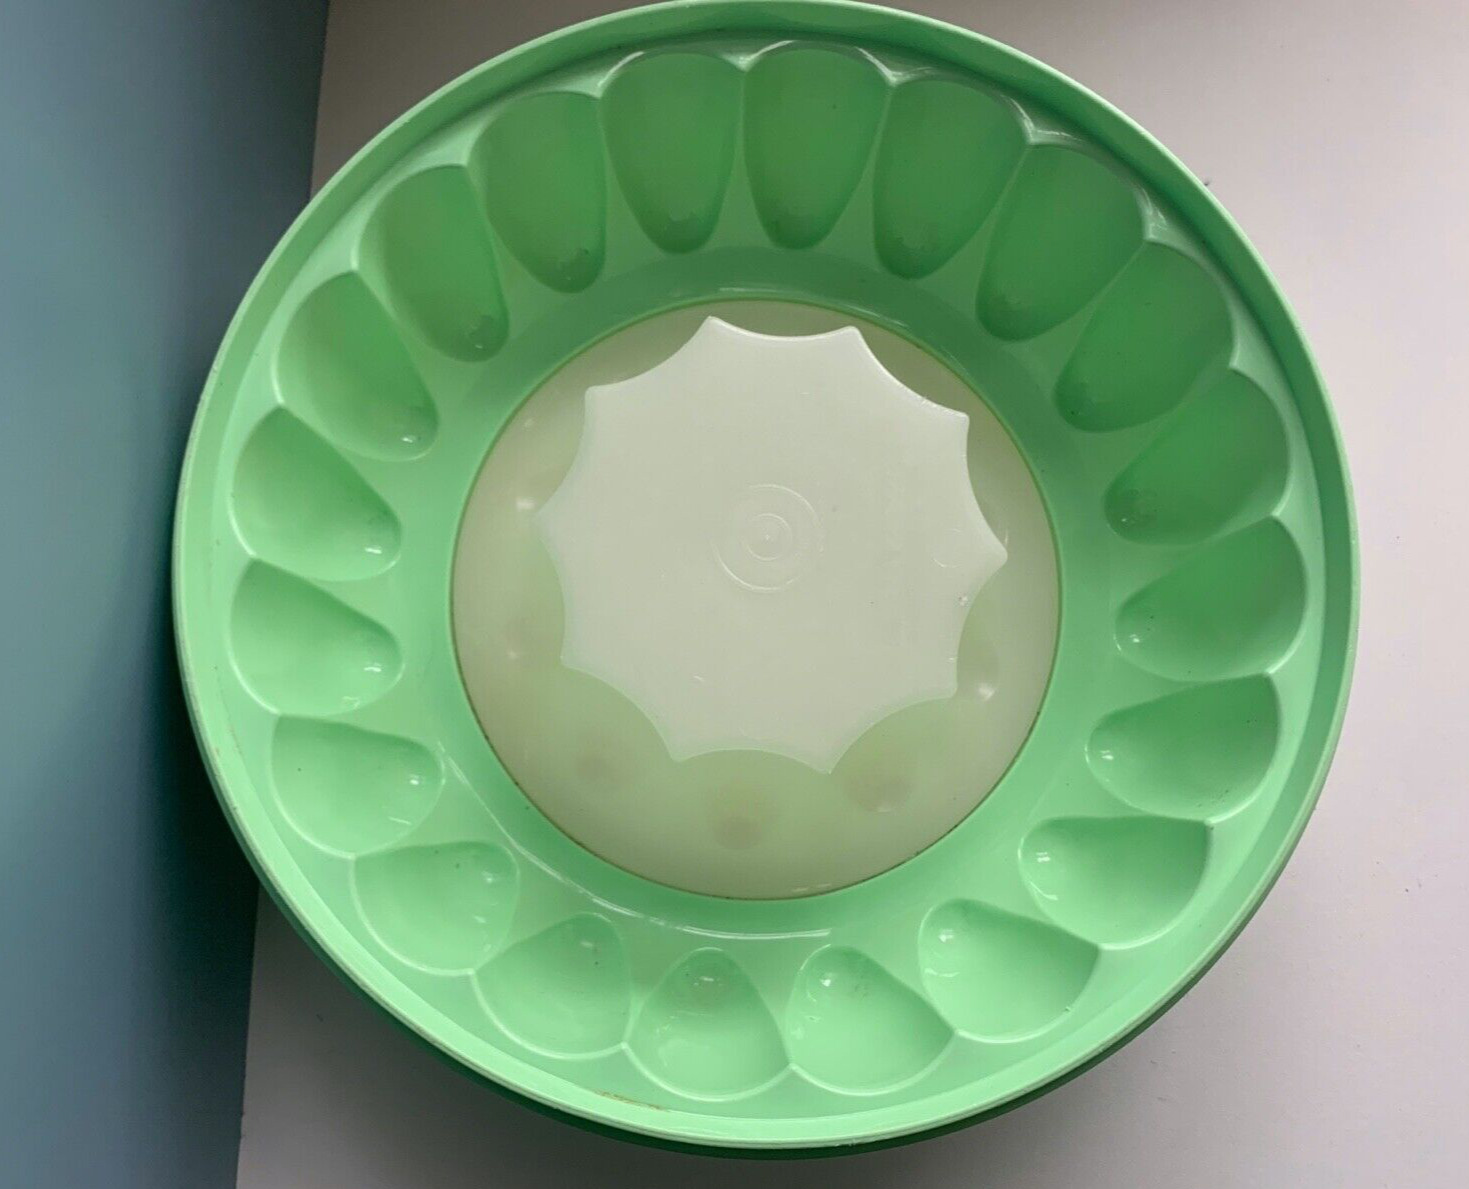 vtg Tupperware Jello Mold Jadeite Mint Green Jell-N-Serve CONTAINER mcm ice ring